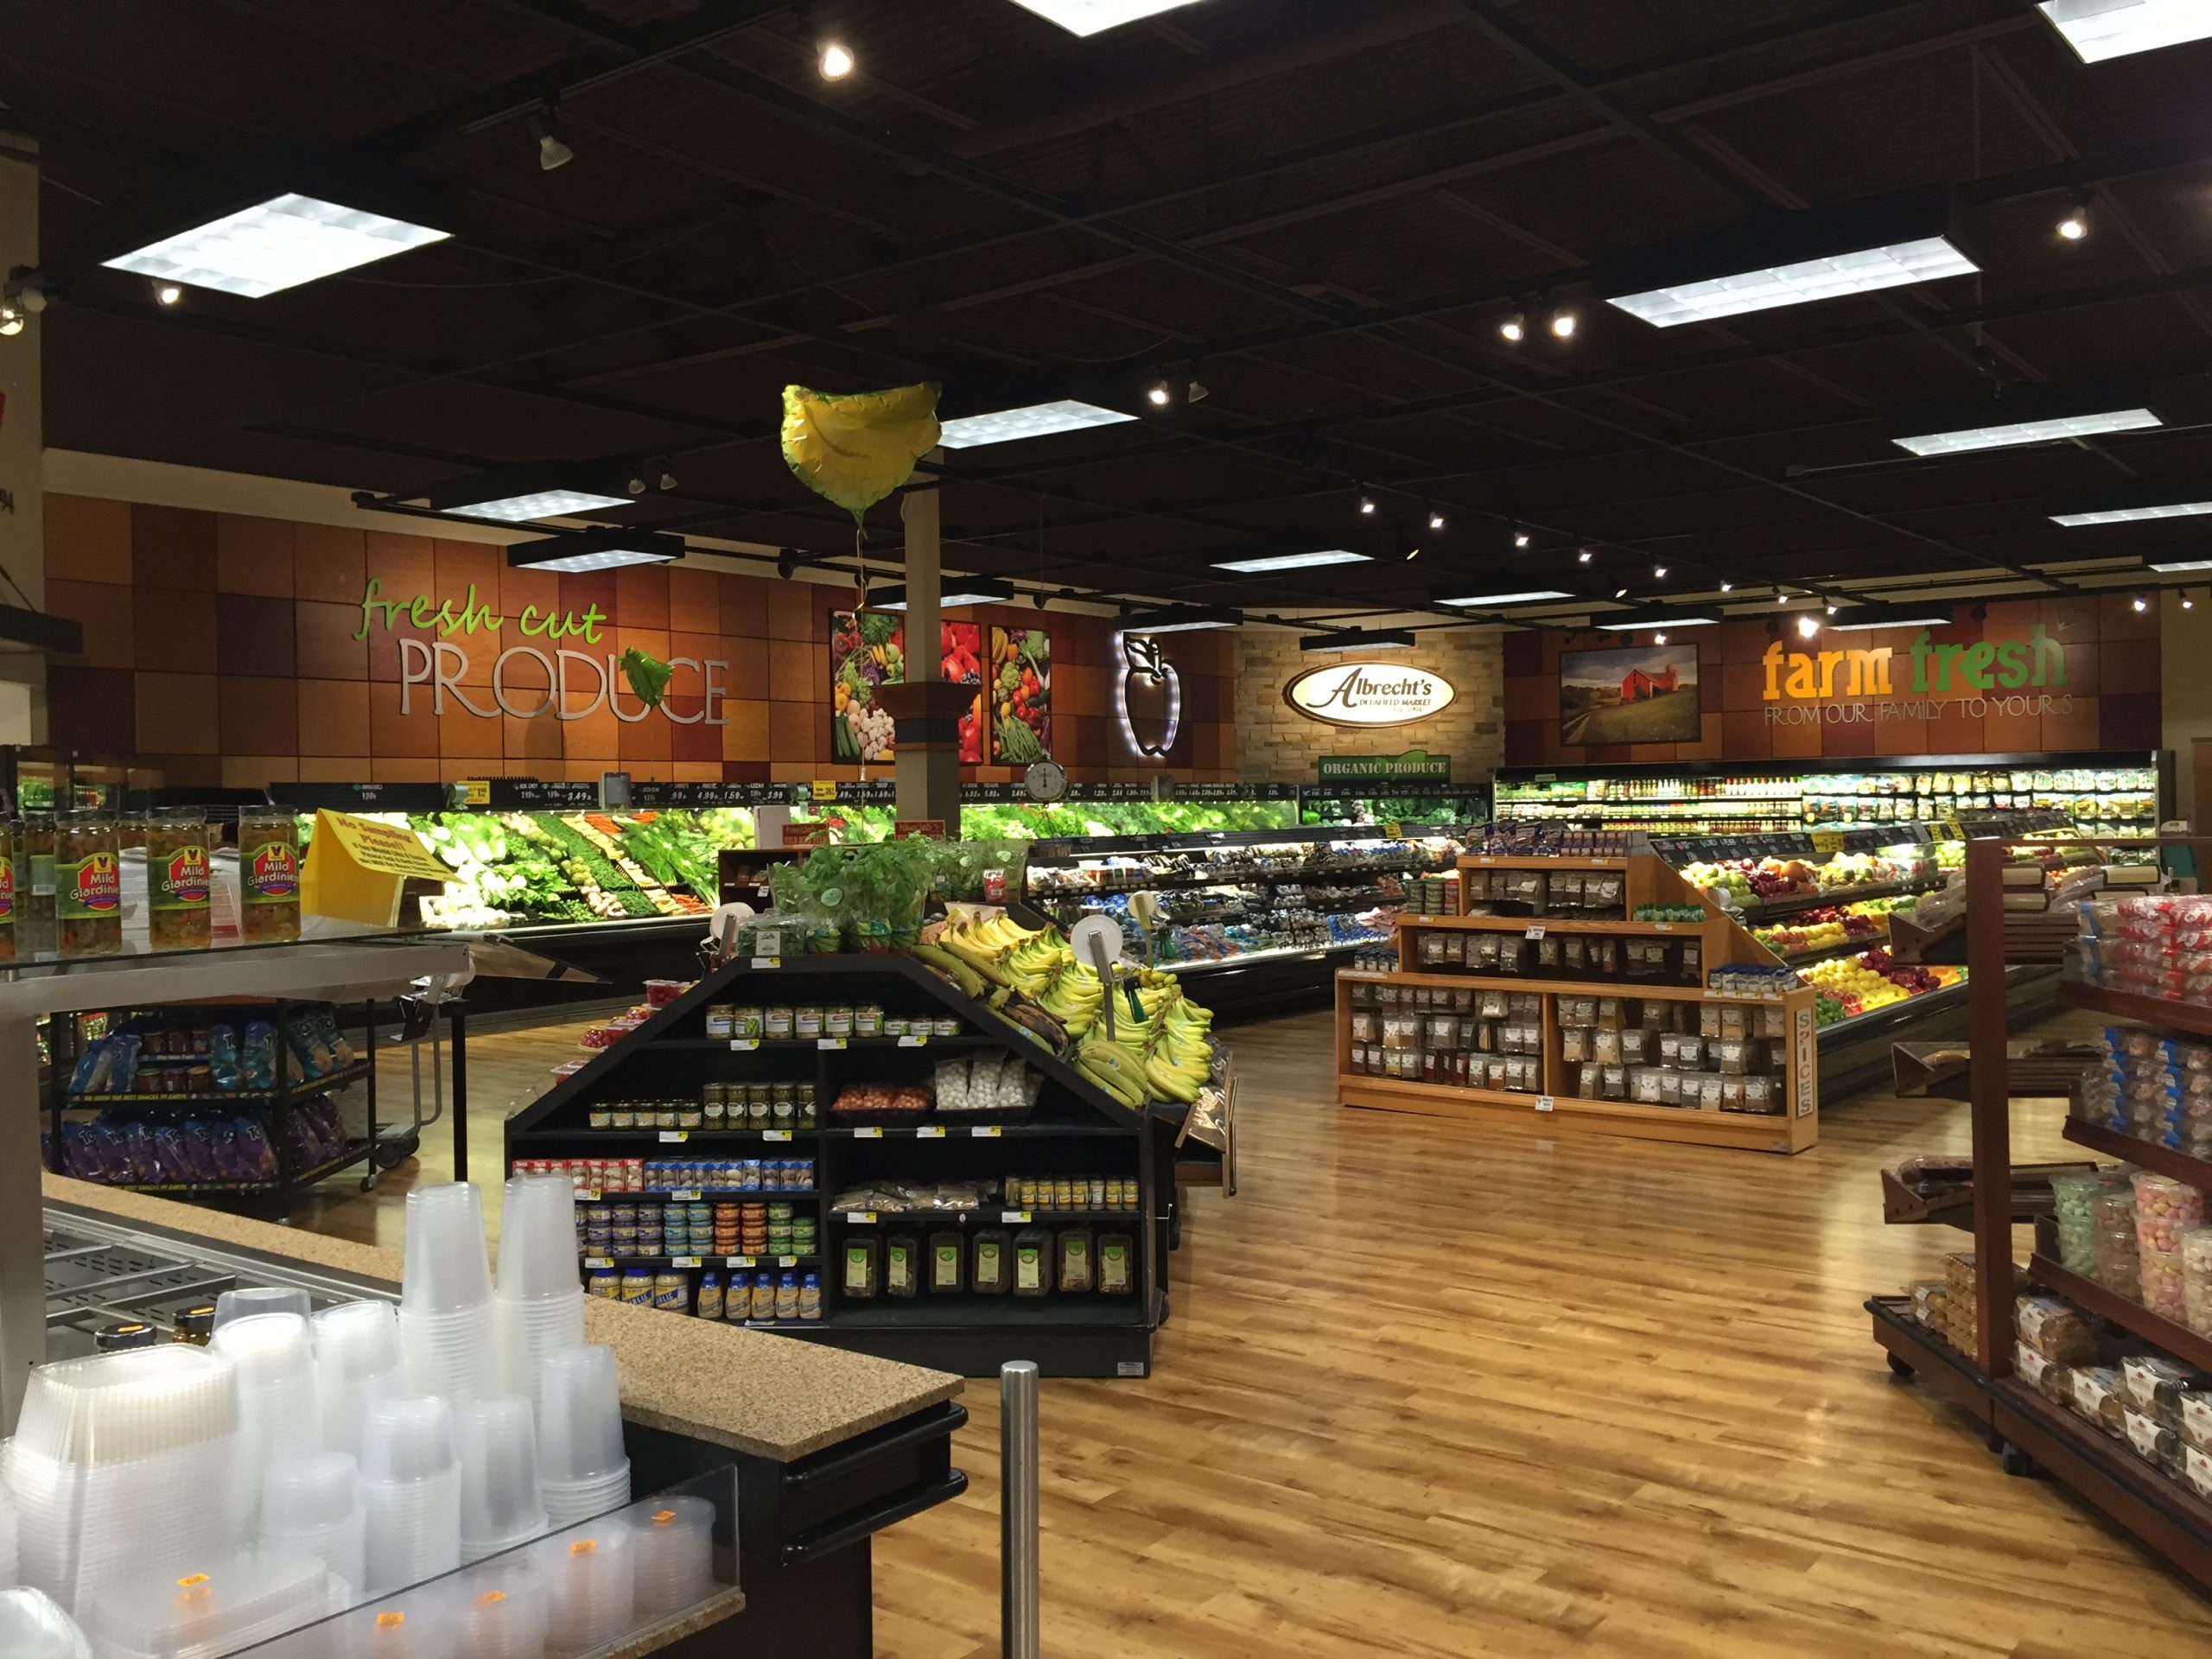 StoreMasters used high-end specialty fixtures to highlight the farm fresh produce